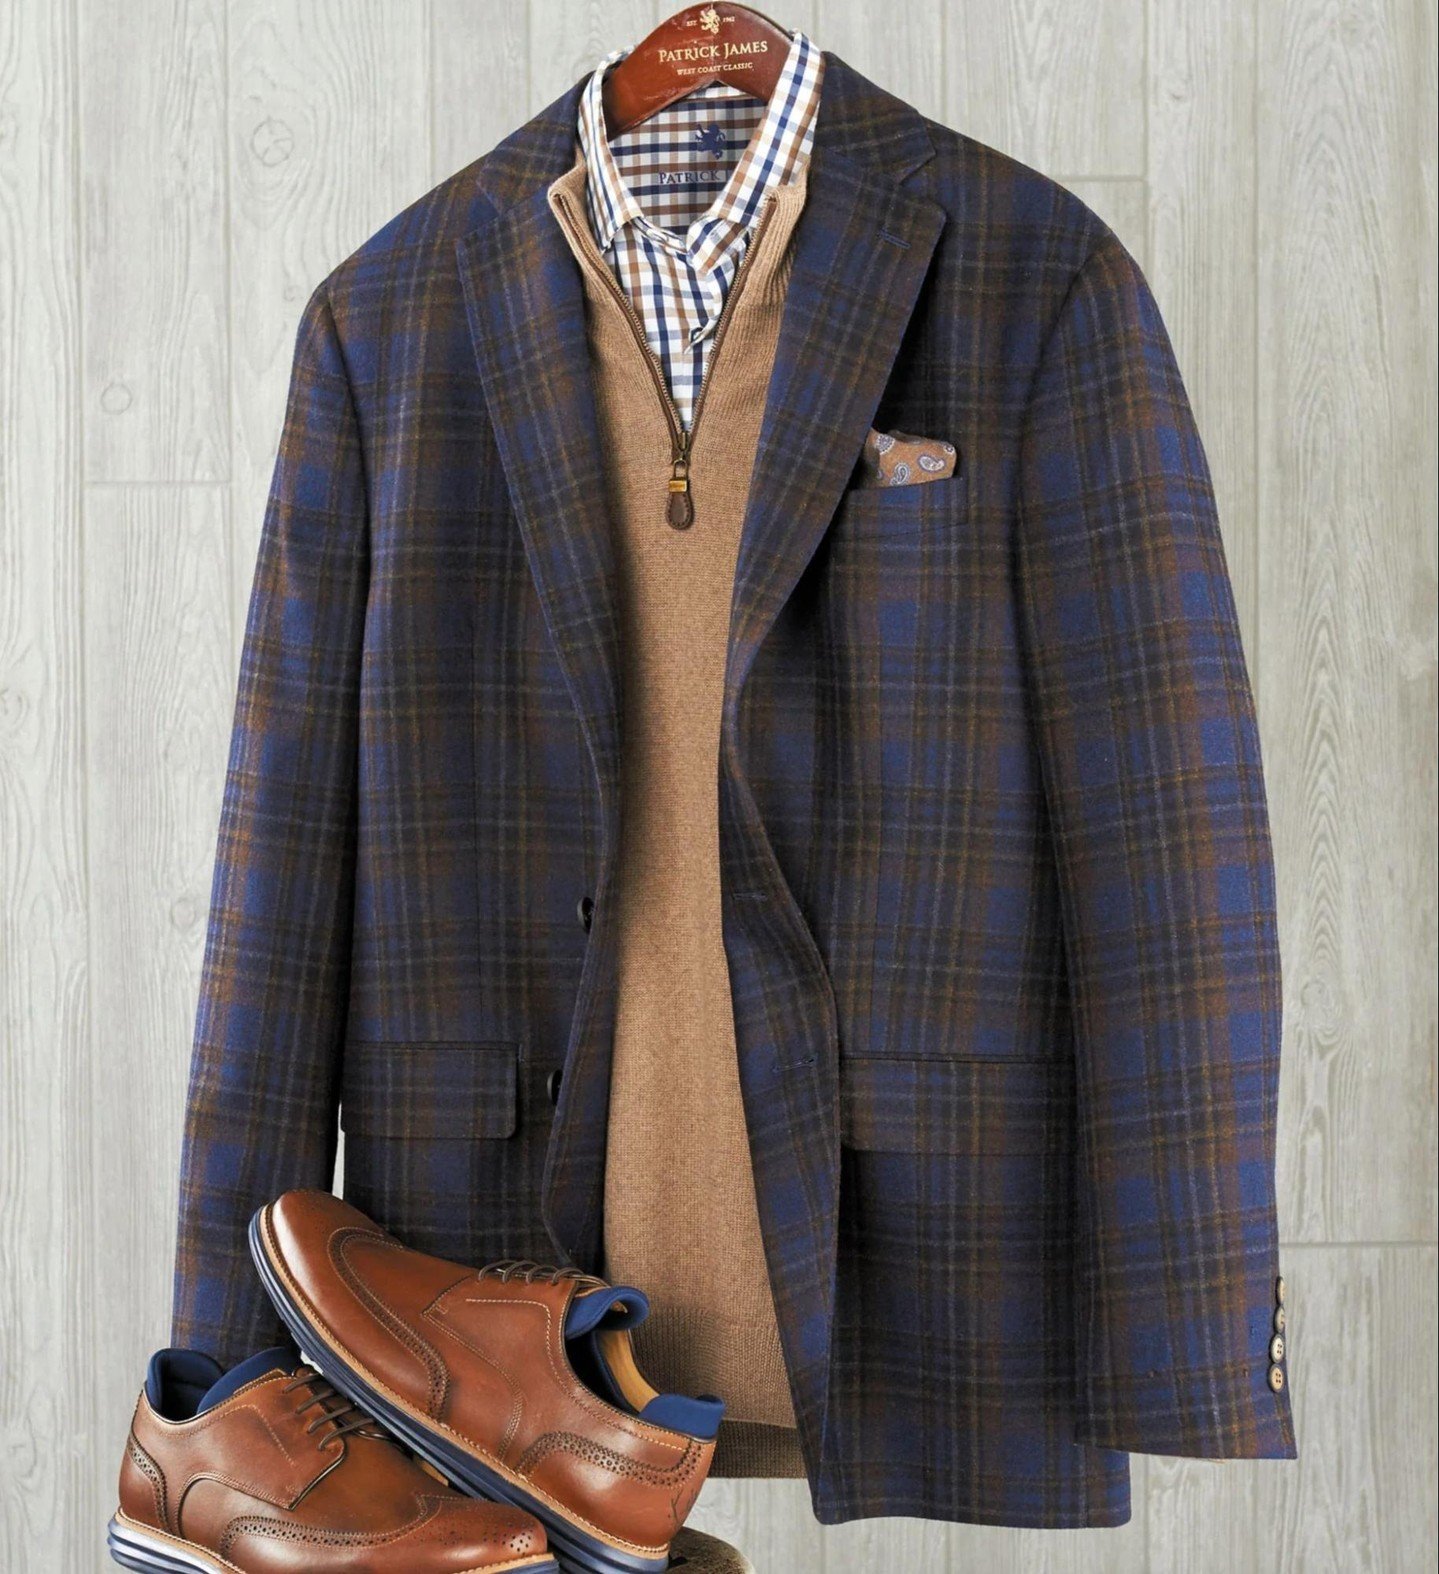 Elevate your wardrobe with Patrick James at The Barnyard, your destination for Men's West Coast Classic attire.

Don&rsquo;t miss their winter sale - save up to 60% on select sweaters, outerwear, pants, flannels, and more. Hurry, as these clearance i